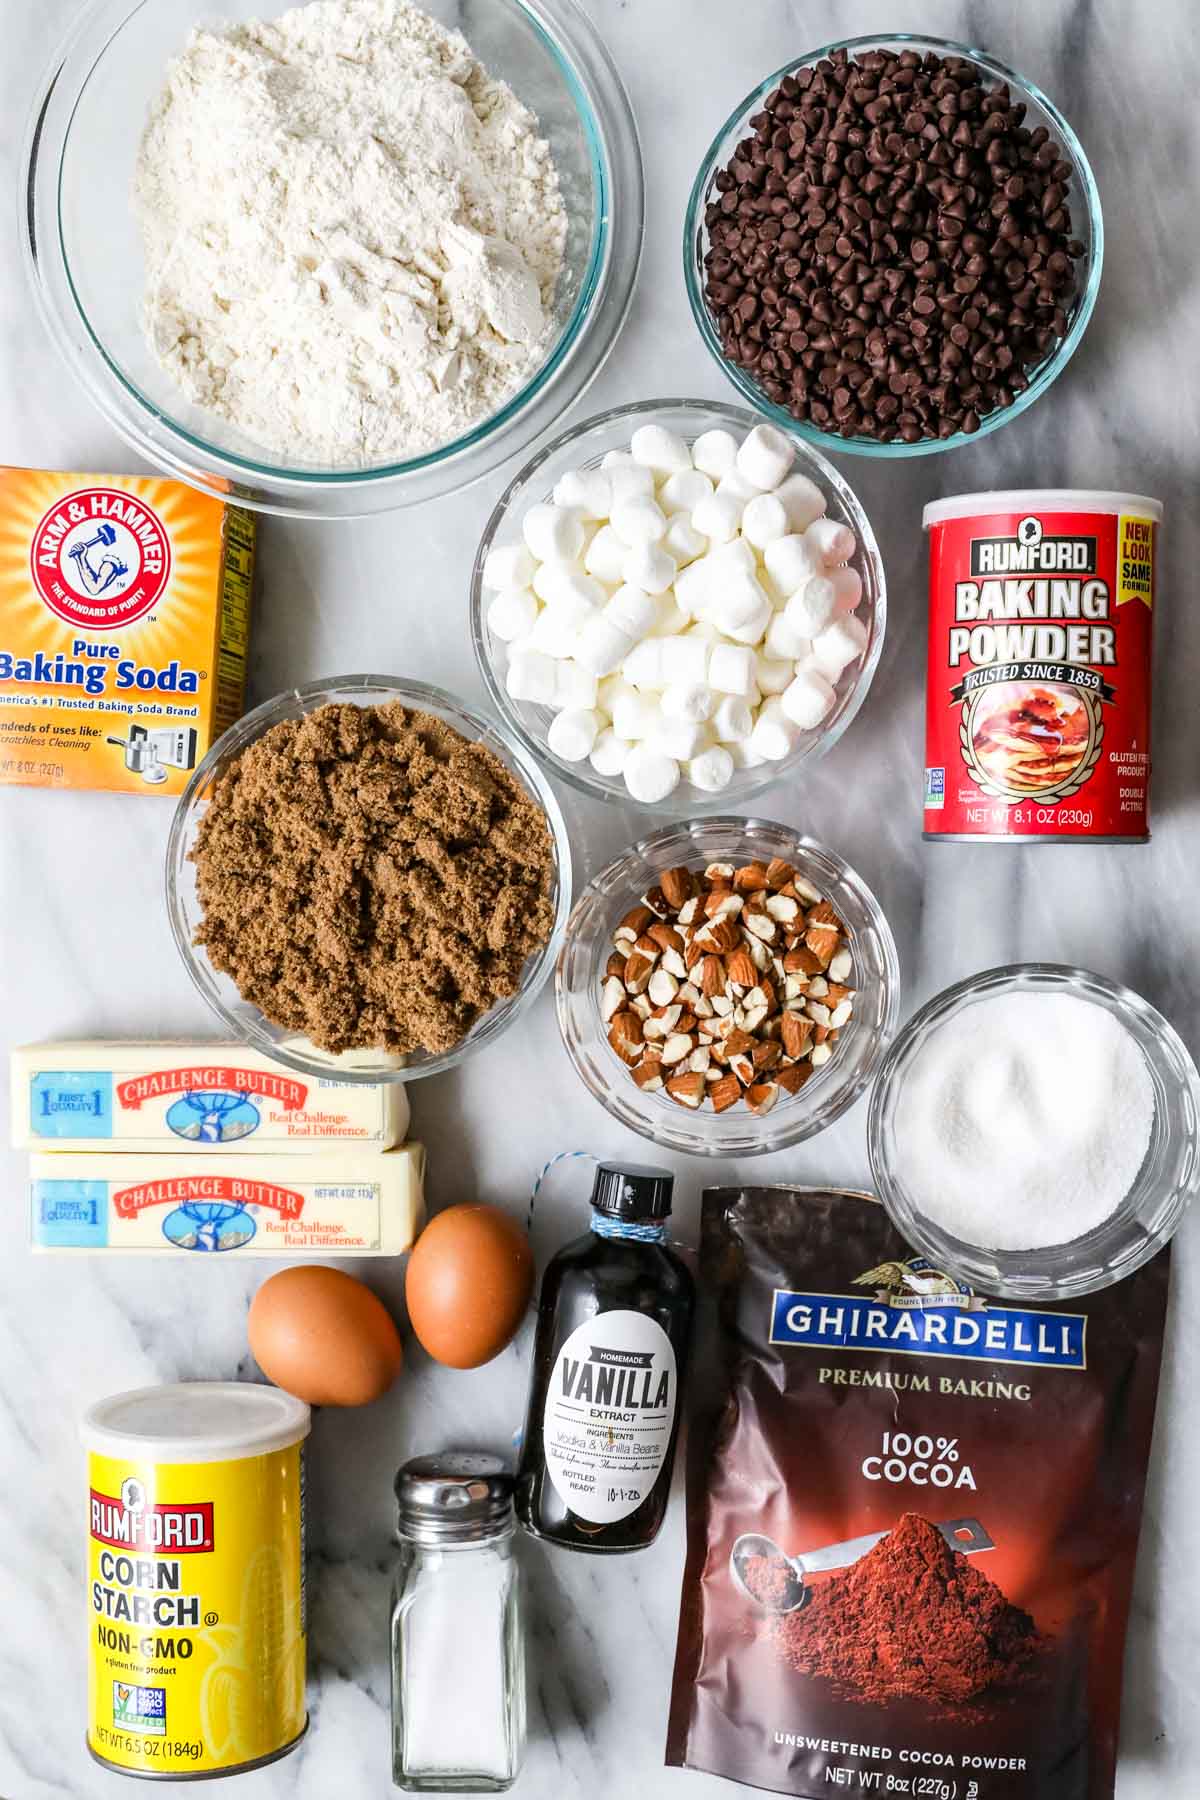 Overhead view of ingredients including brown sugar, cocoa powder, mini marshmallows, almonds, and more.